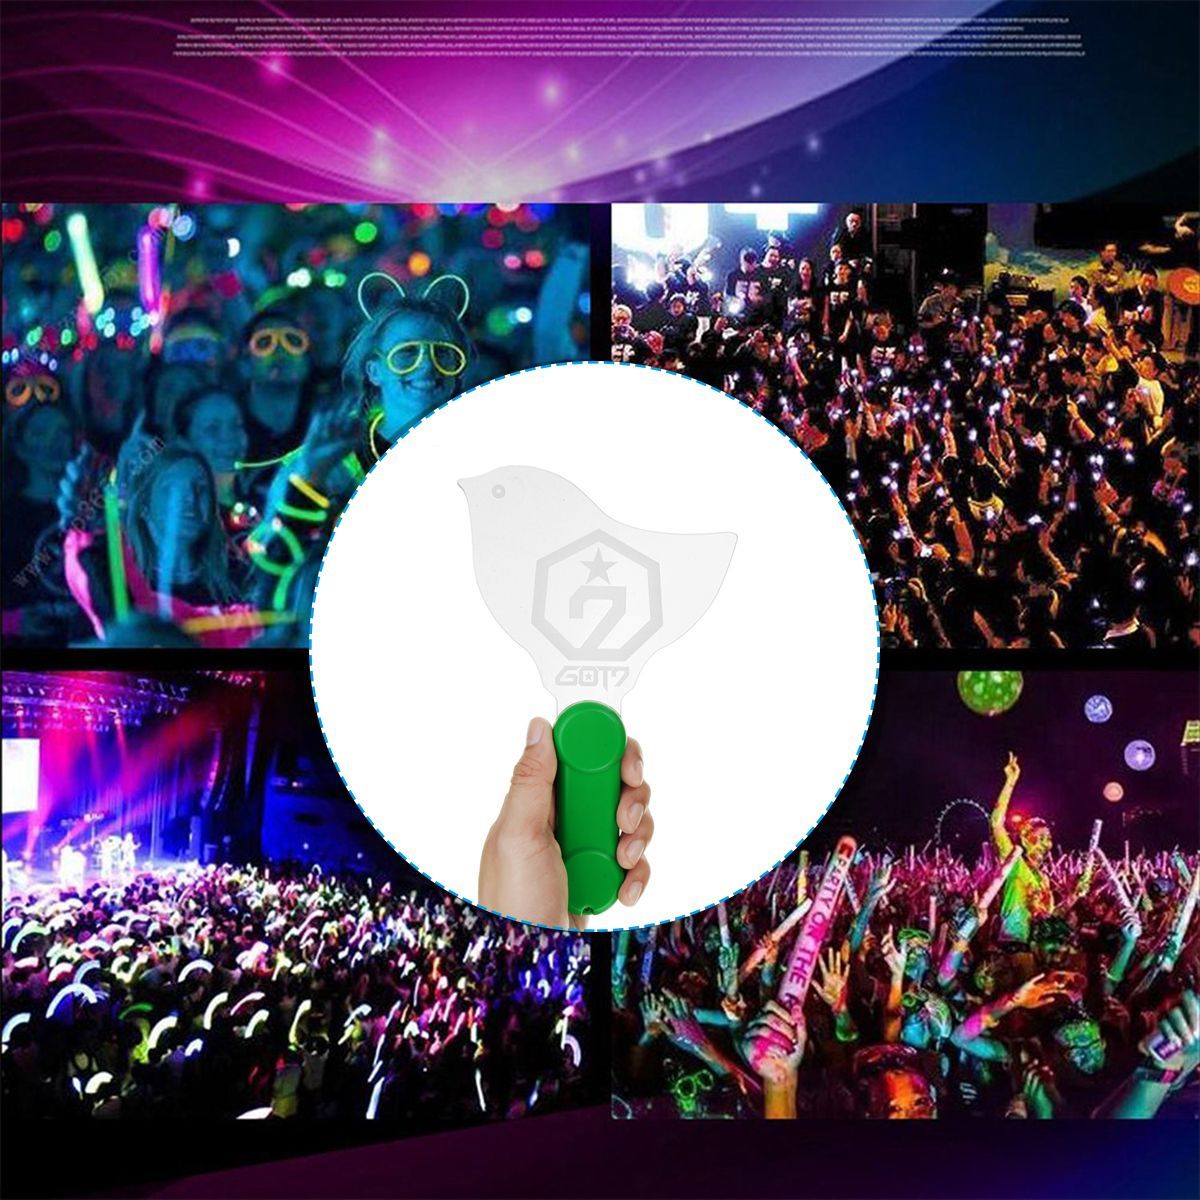 Vocal-Concerts-Glow-Sticks-LED-Light-Stick-Party-Wedding-Magic-Hot-Camping-Chemical-Fluorescent-Deco-1536081